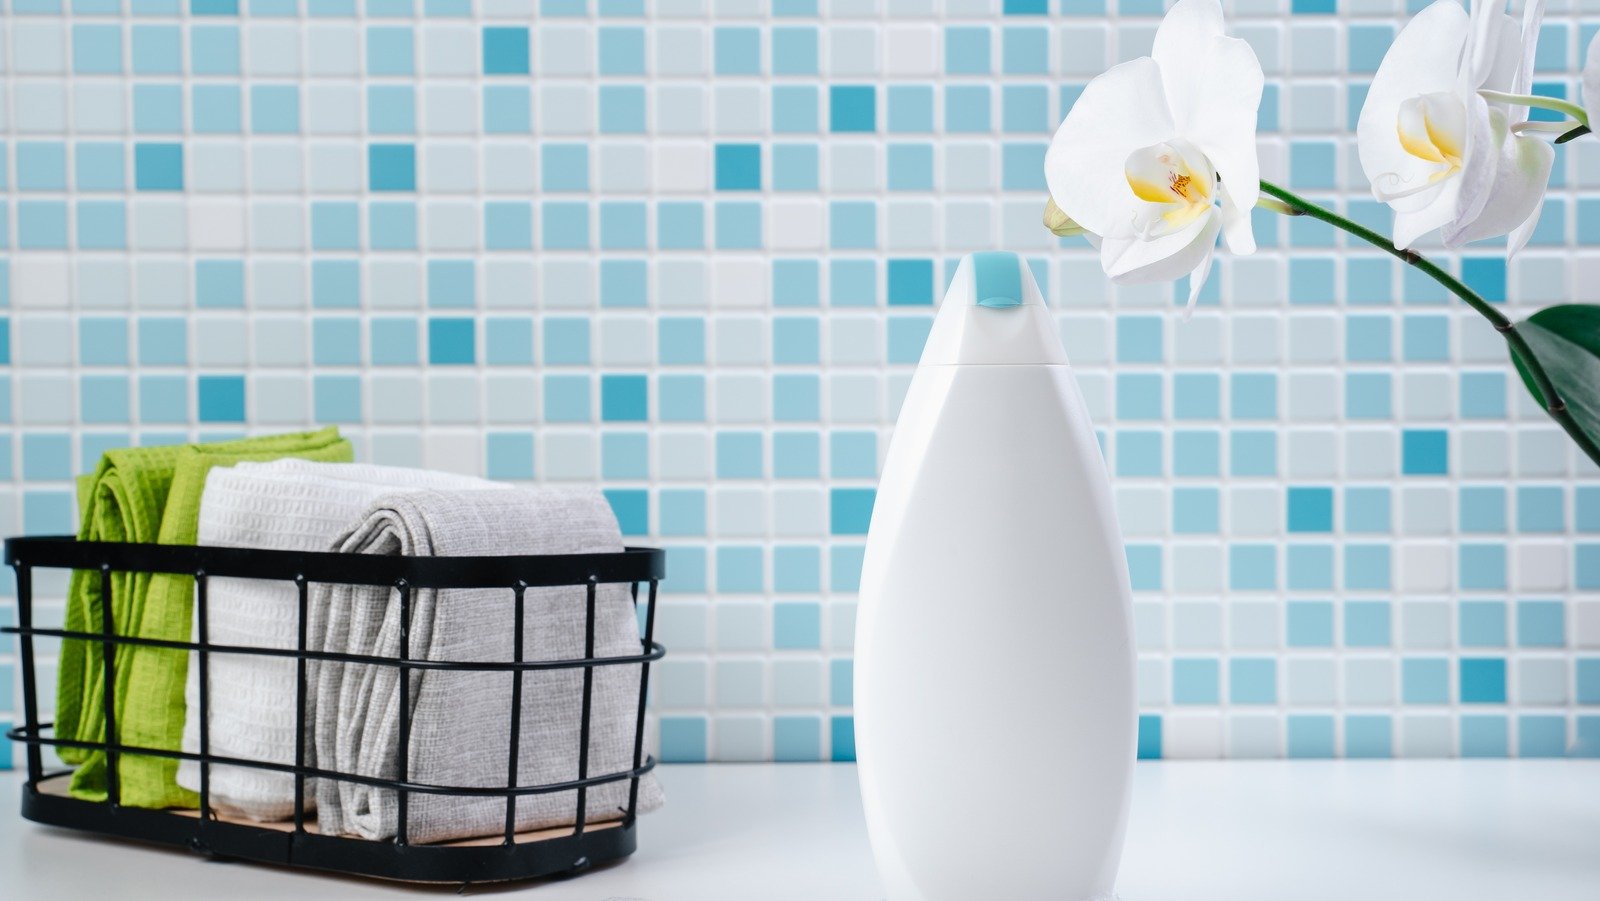 5 Shower Storage Ideas That Keep Your Favorite Products Within Reach